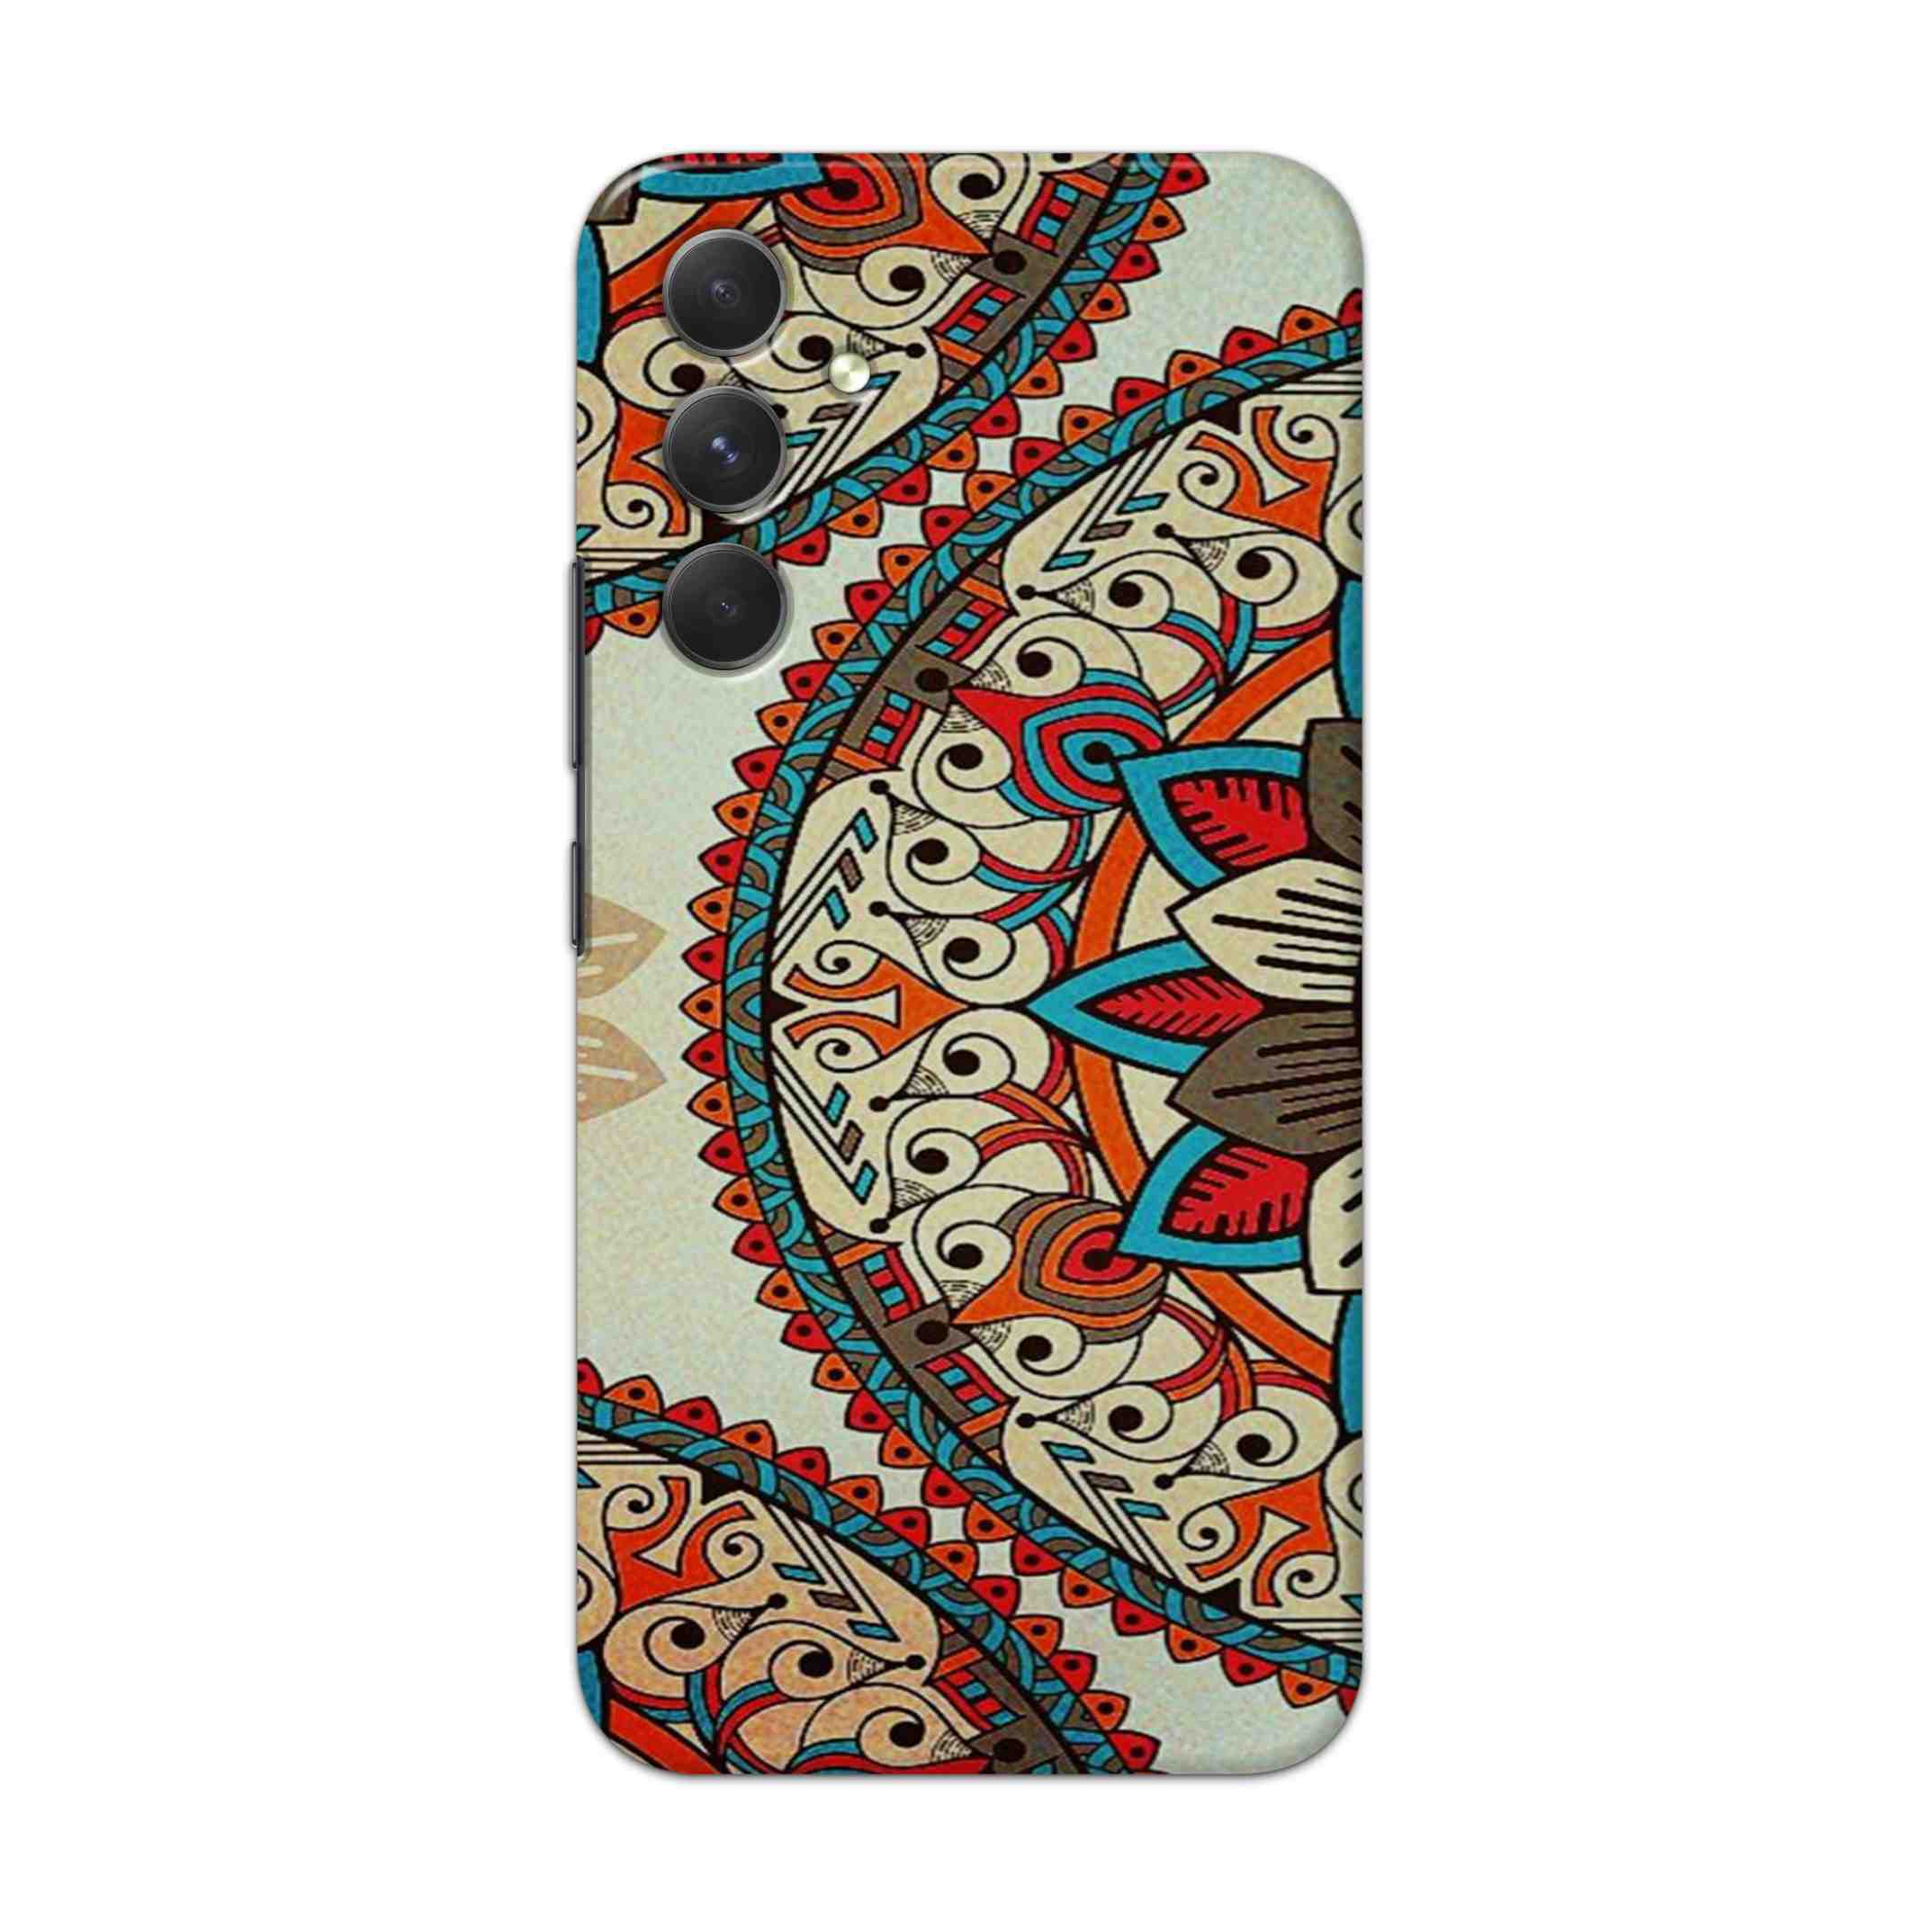 Buy Aztec Mandalas Hard Back Mobile Phone Case Cover For Samsung Galaxy A54 5G Online